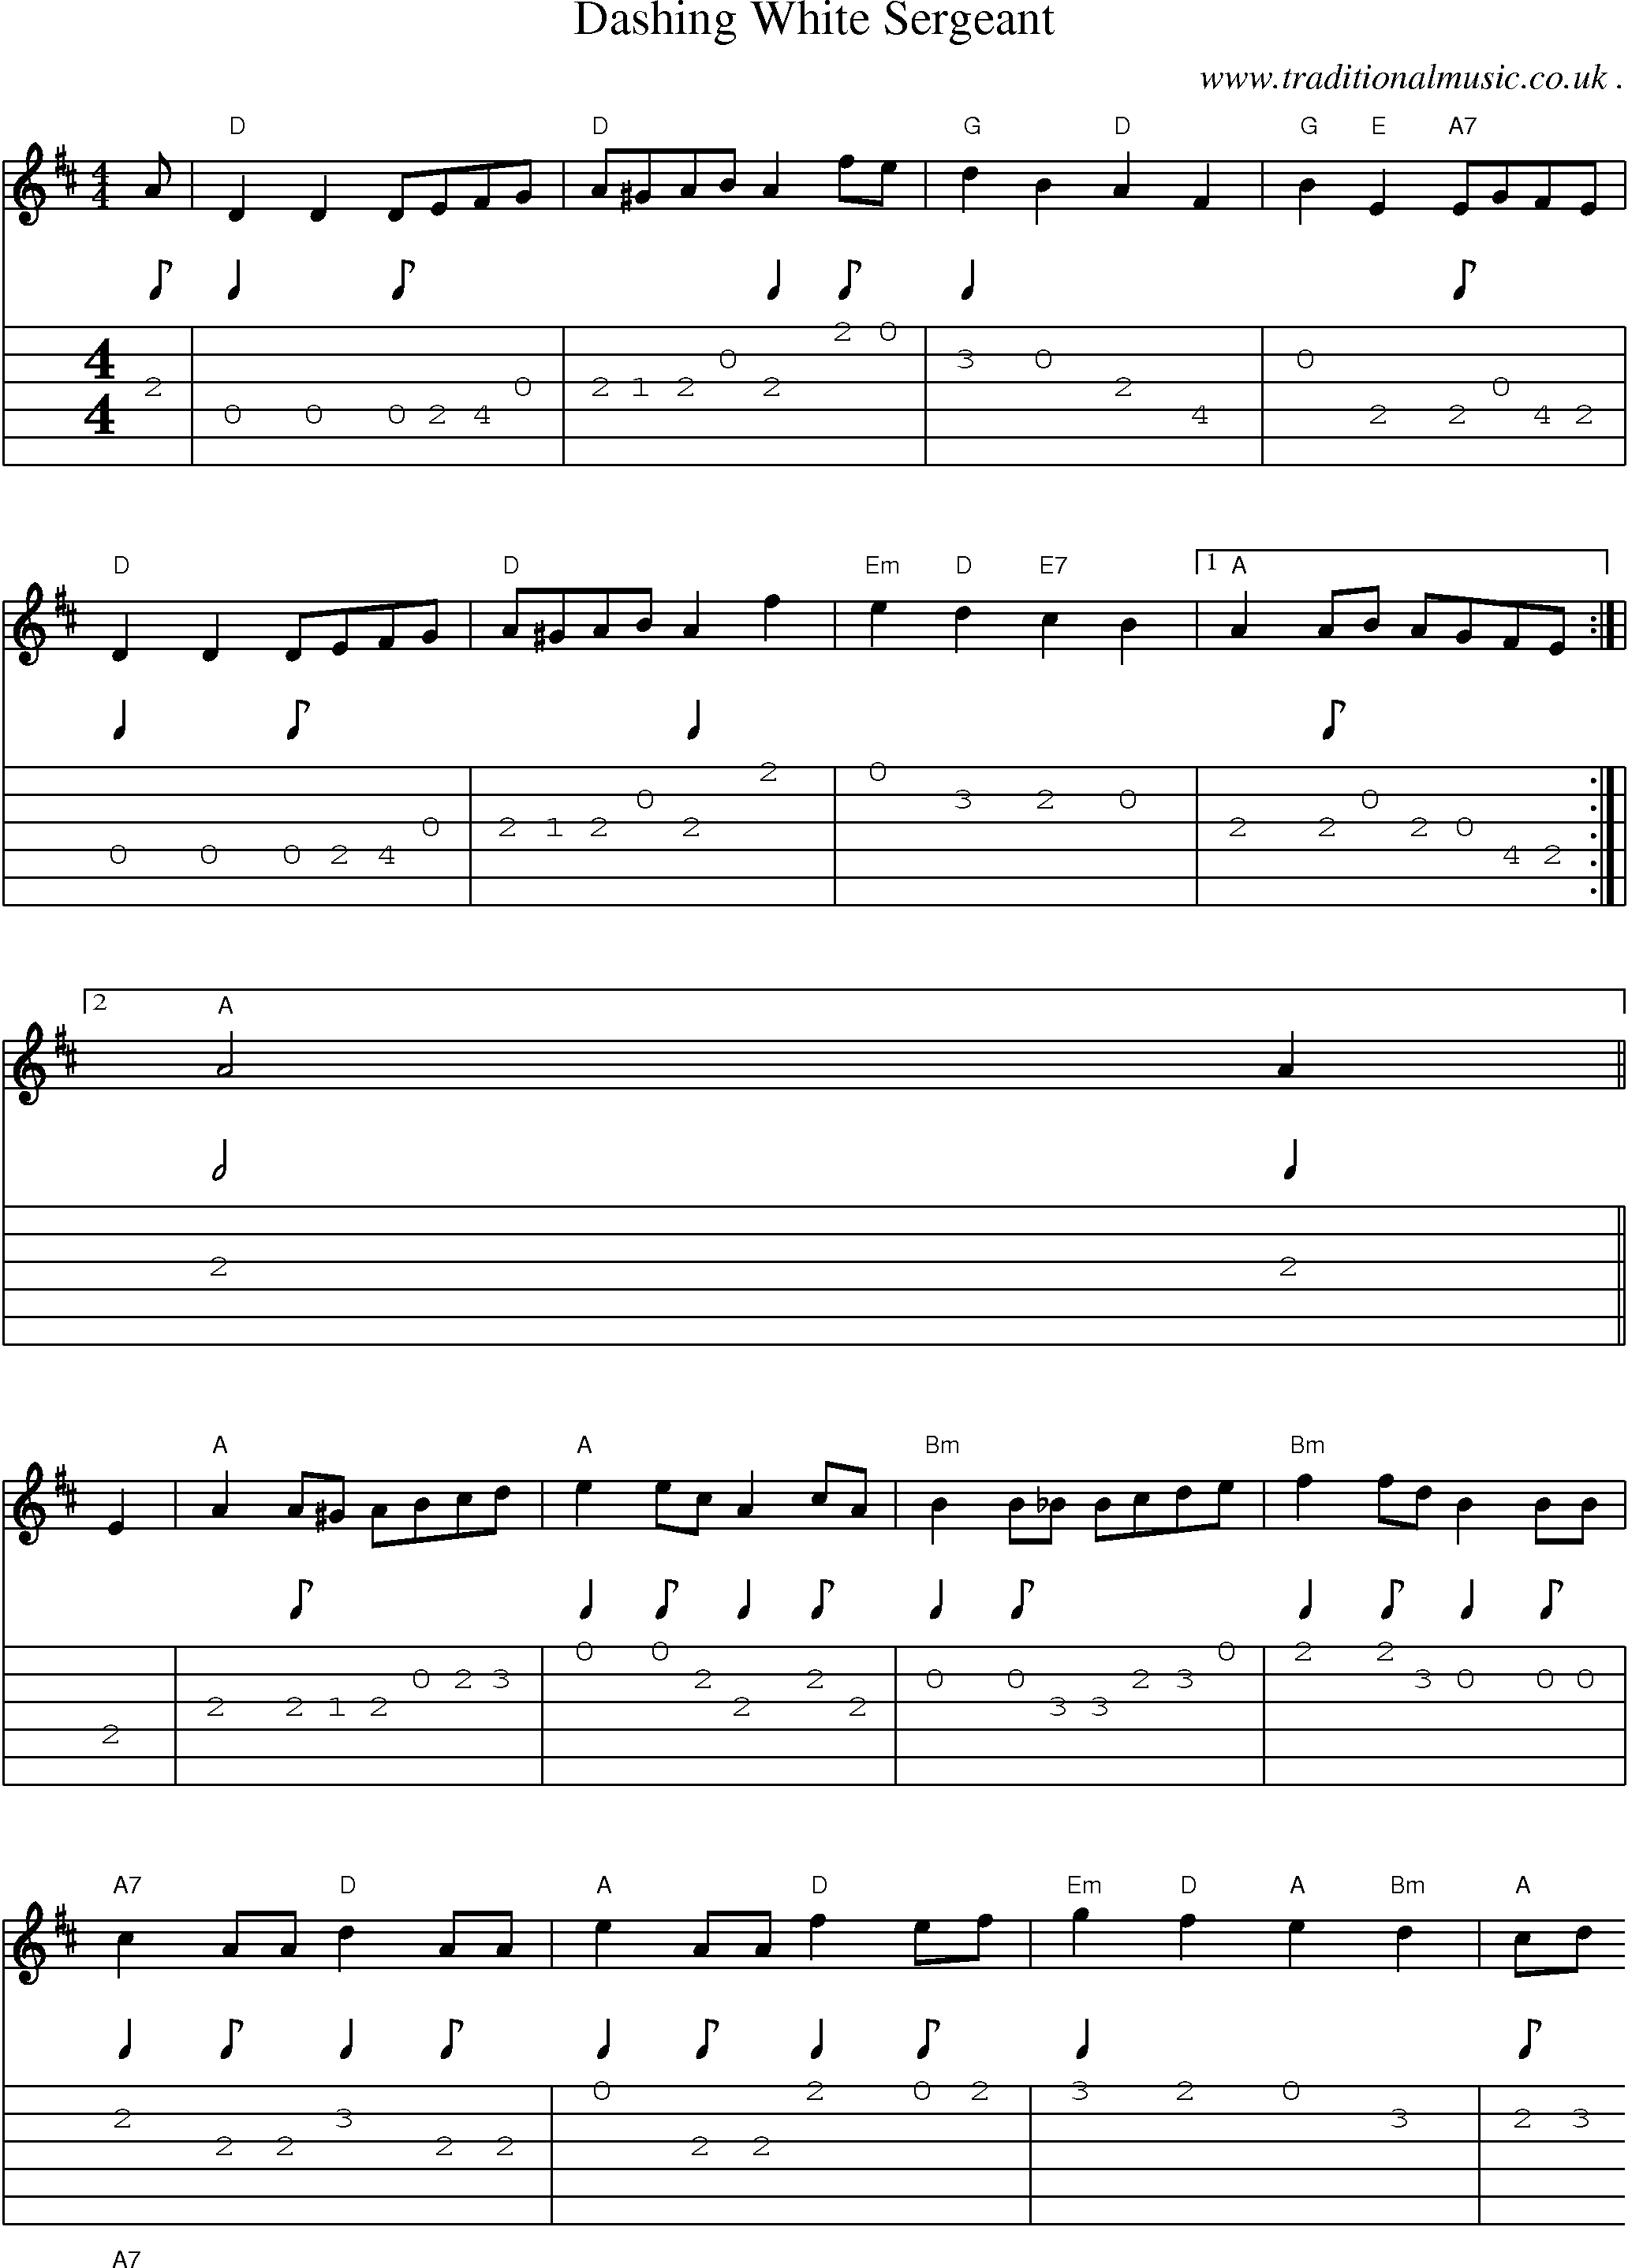 Sheet-Music and Guitar Tabs for Dashing White Sergeant